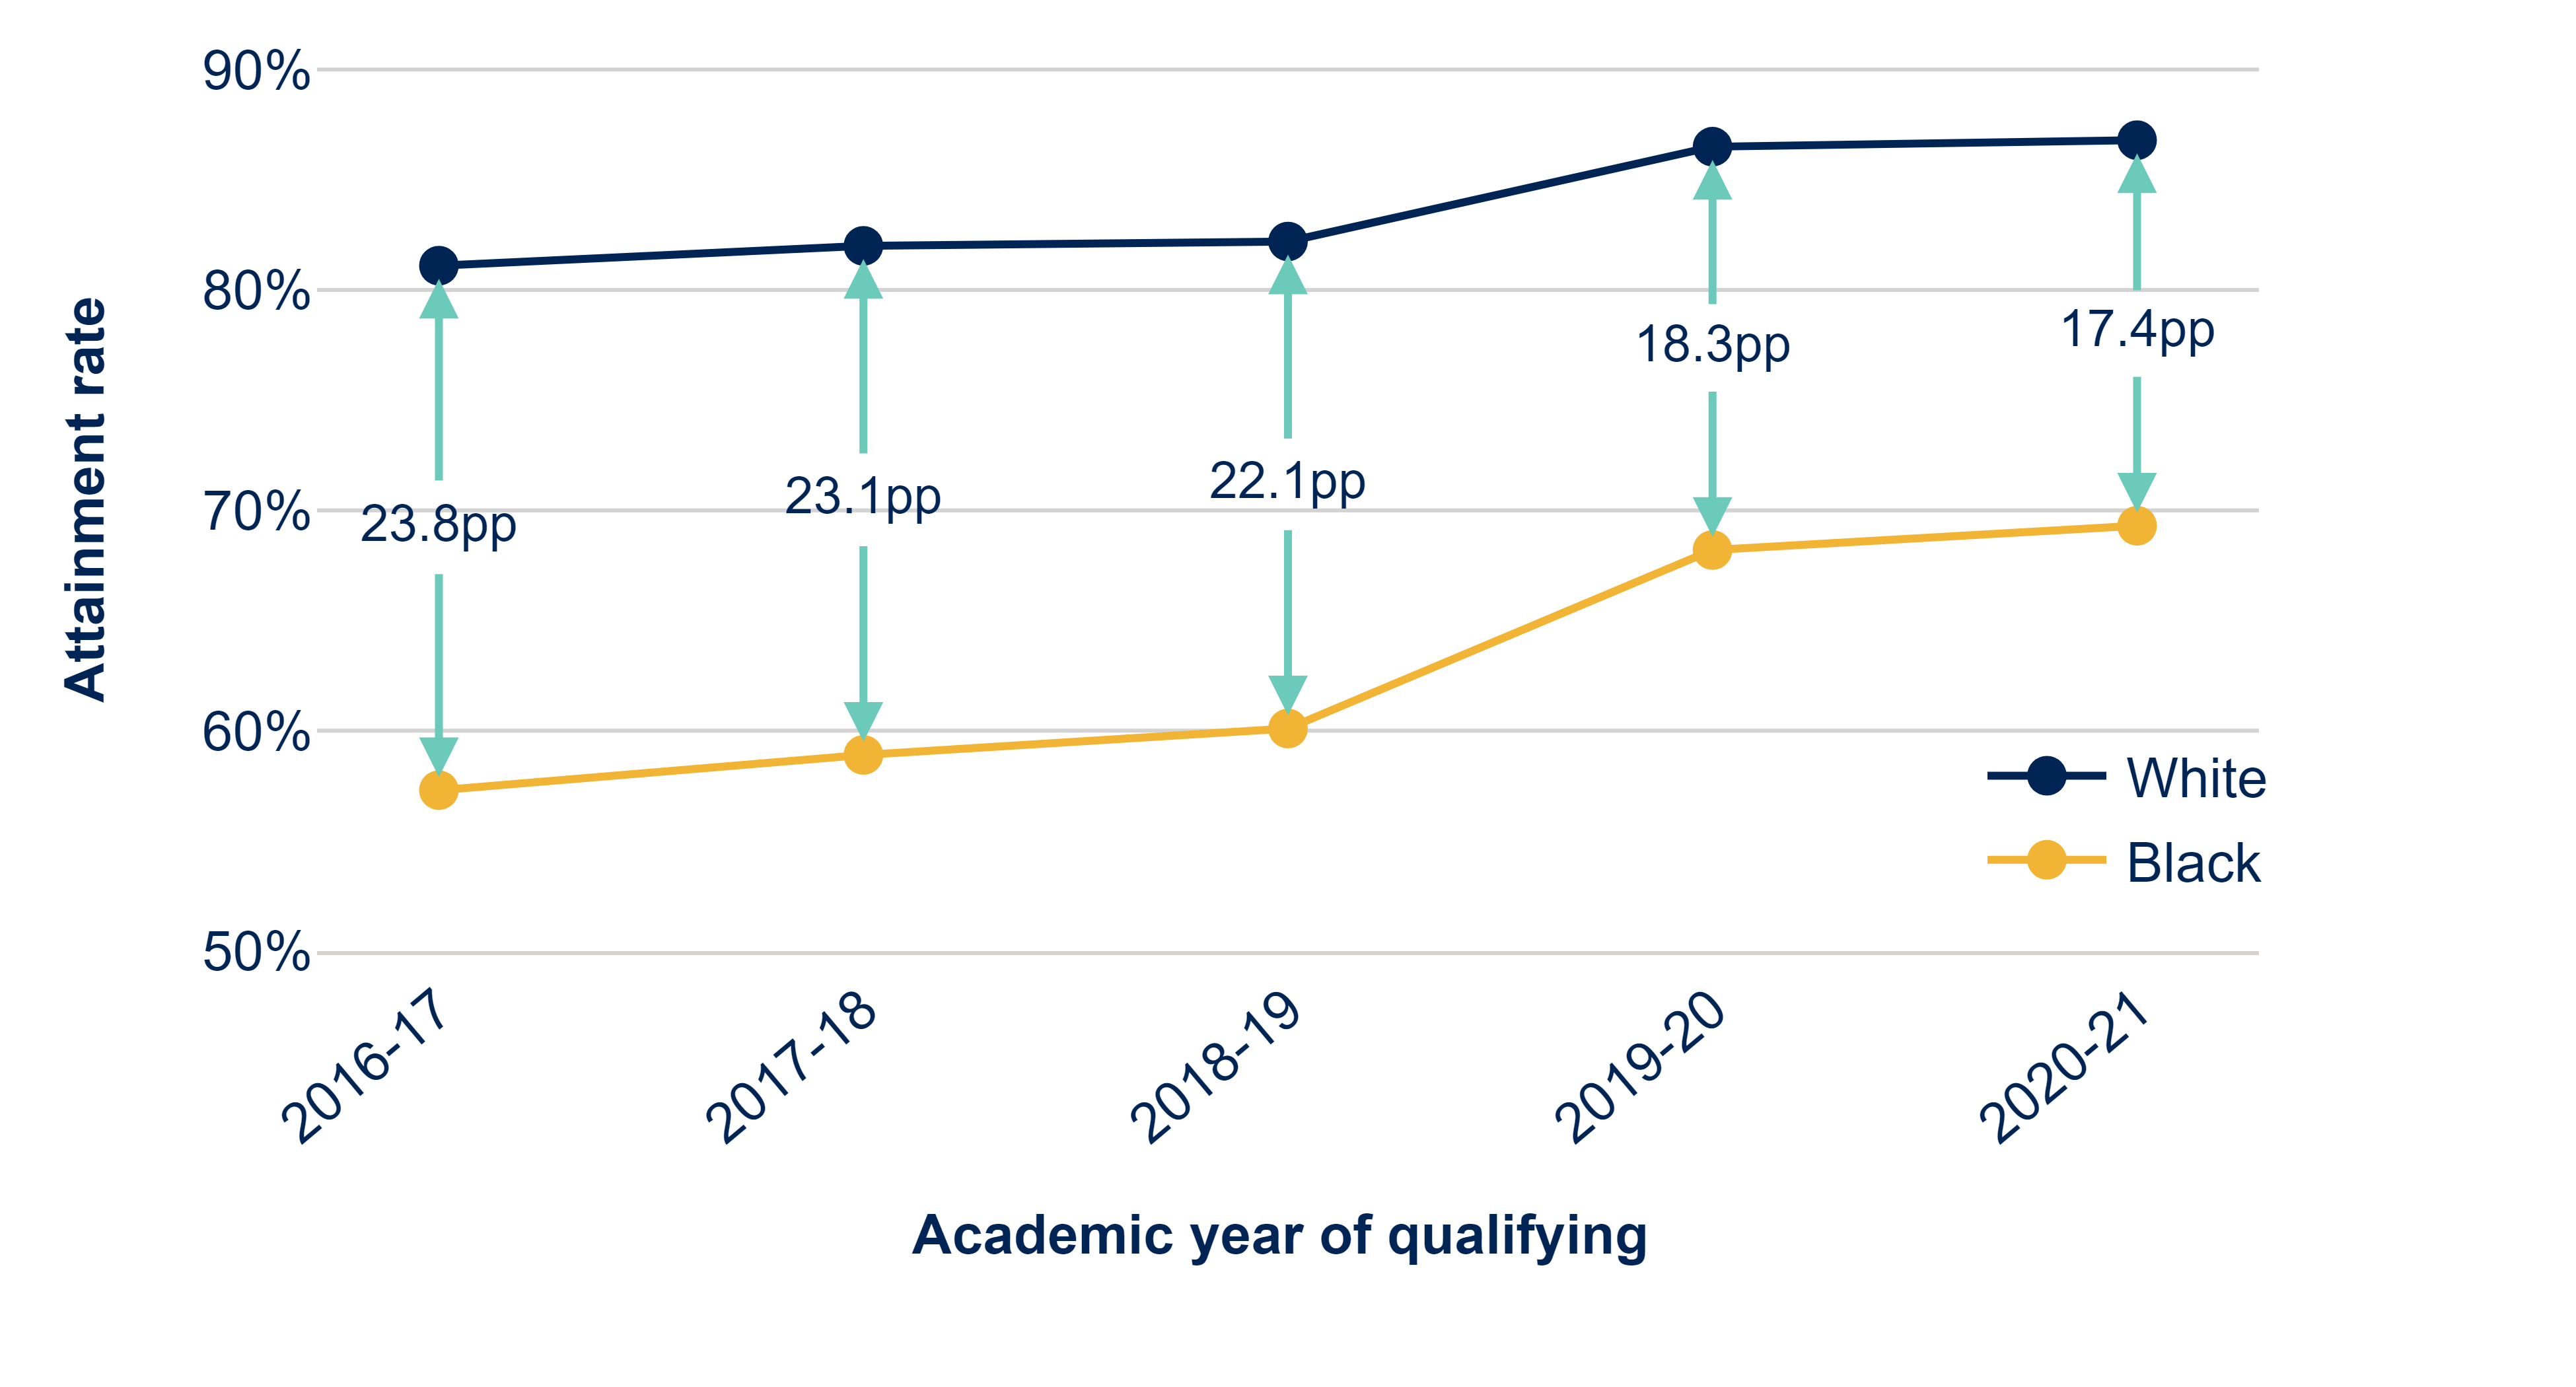 This graph has two lines, one for white students and one for black students. It shows the attainment rate for the full-time undergraduate students in each of these groups for each year.  

The bottom line is for black students and the attainment rate increases very slightly over the first three years (from 57.3 per cent in 2016-17 to 60.1 per cent in 2018-19). There is a notably increase between 2018-19 and 2019-20, after which it increases again, but more slowly. In 2019-20 the rate is 69.3 per cent. 

The upper line is for white students and the pattern over the five years is the same. The attainment rate increases very slightly over the first three years (from 81.1 per cent in 2016-17 to 82.2 per cent in 2018-19). There is a notably increase between 2018-19 and 2019-20, after which it increases again, but more slowly. In 2019-20 the rate is 86.8 per cent. 

The gaps that exist between these two lines are also shown. In 2016-17 the gap is 23.8 percentage points, this decreases over the 5 year period to 17.4 percentage points in 2020-21.